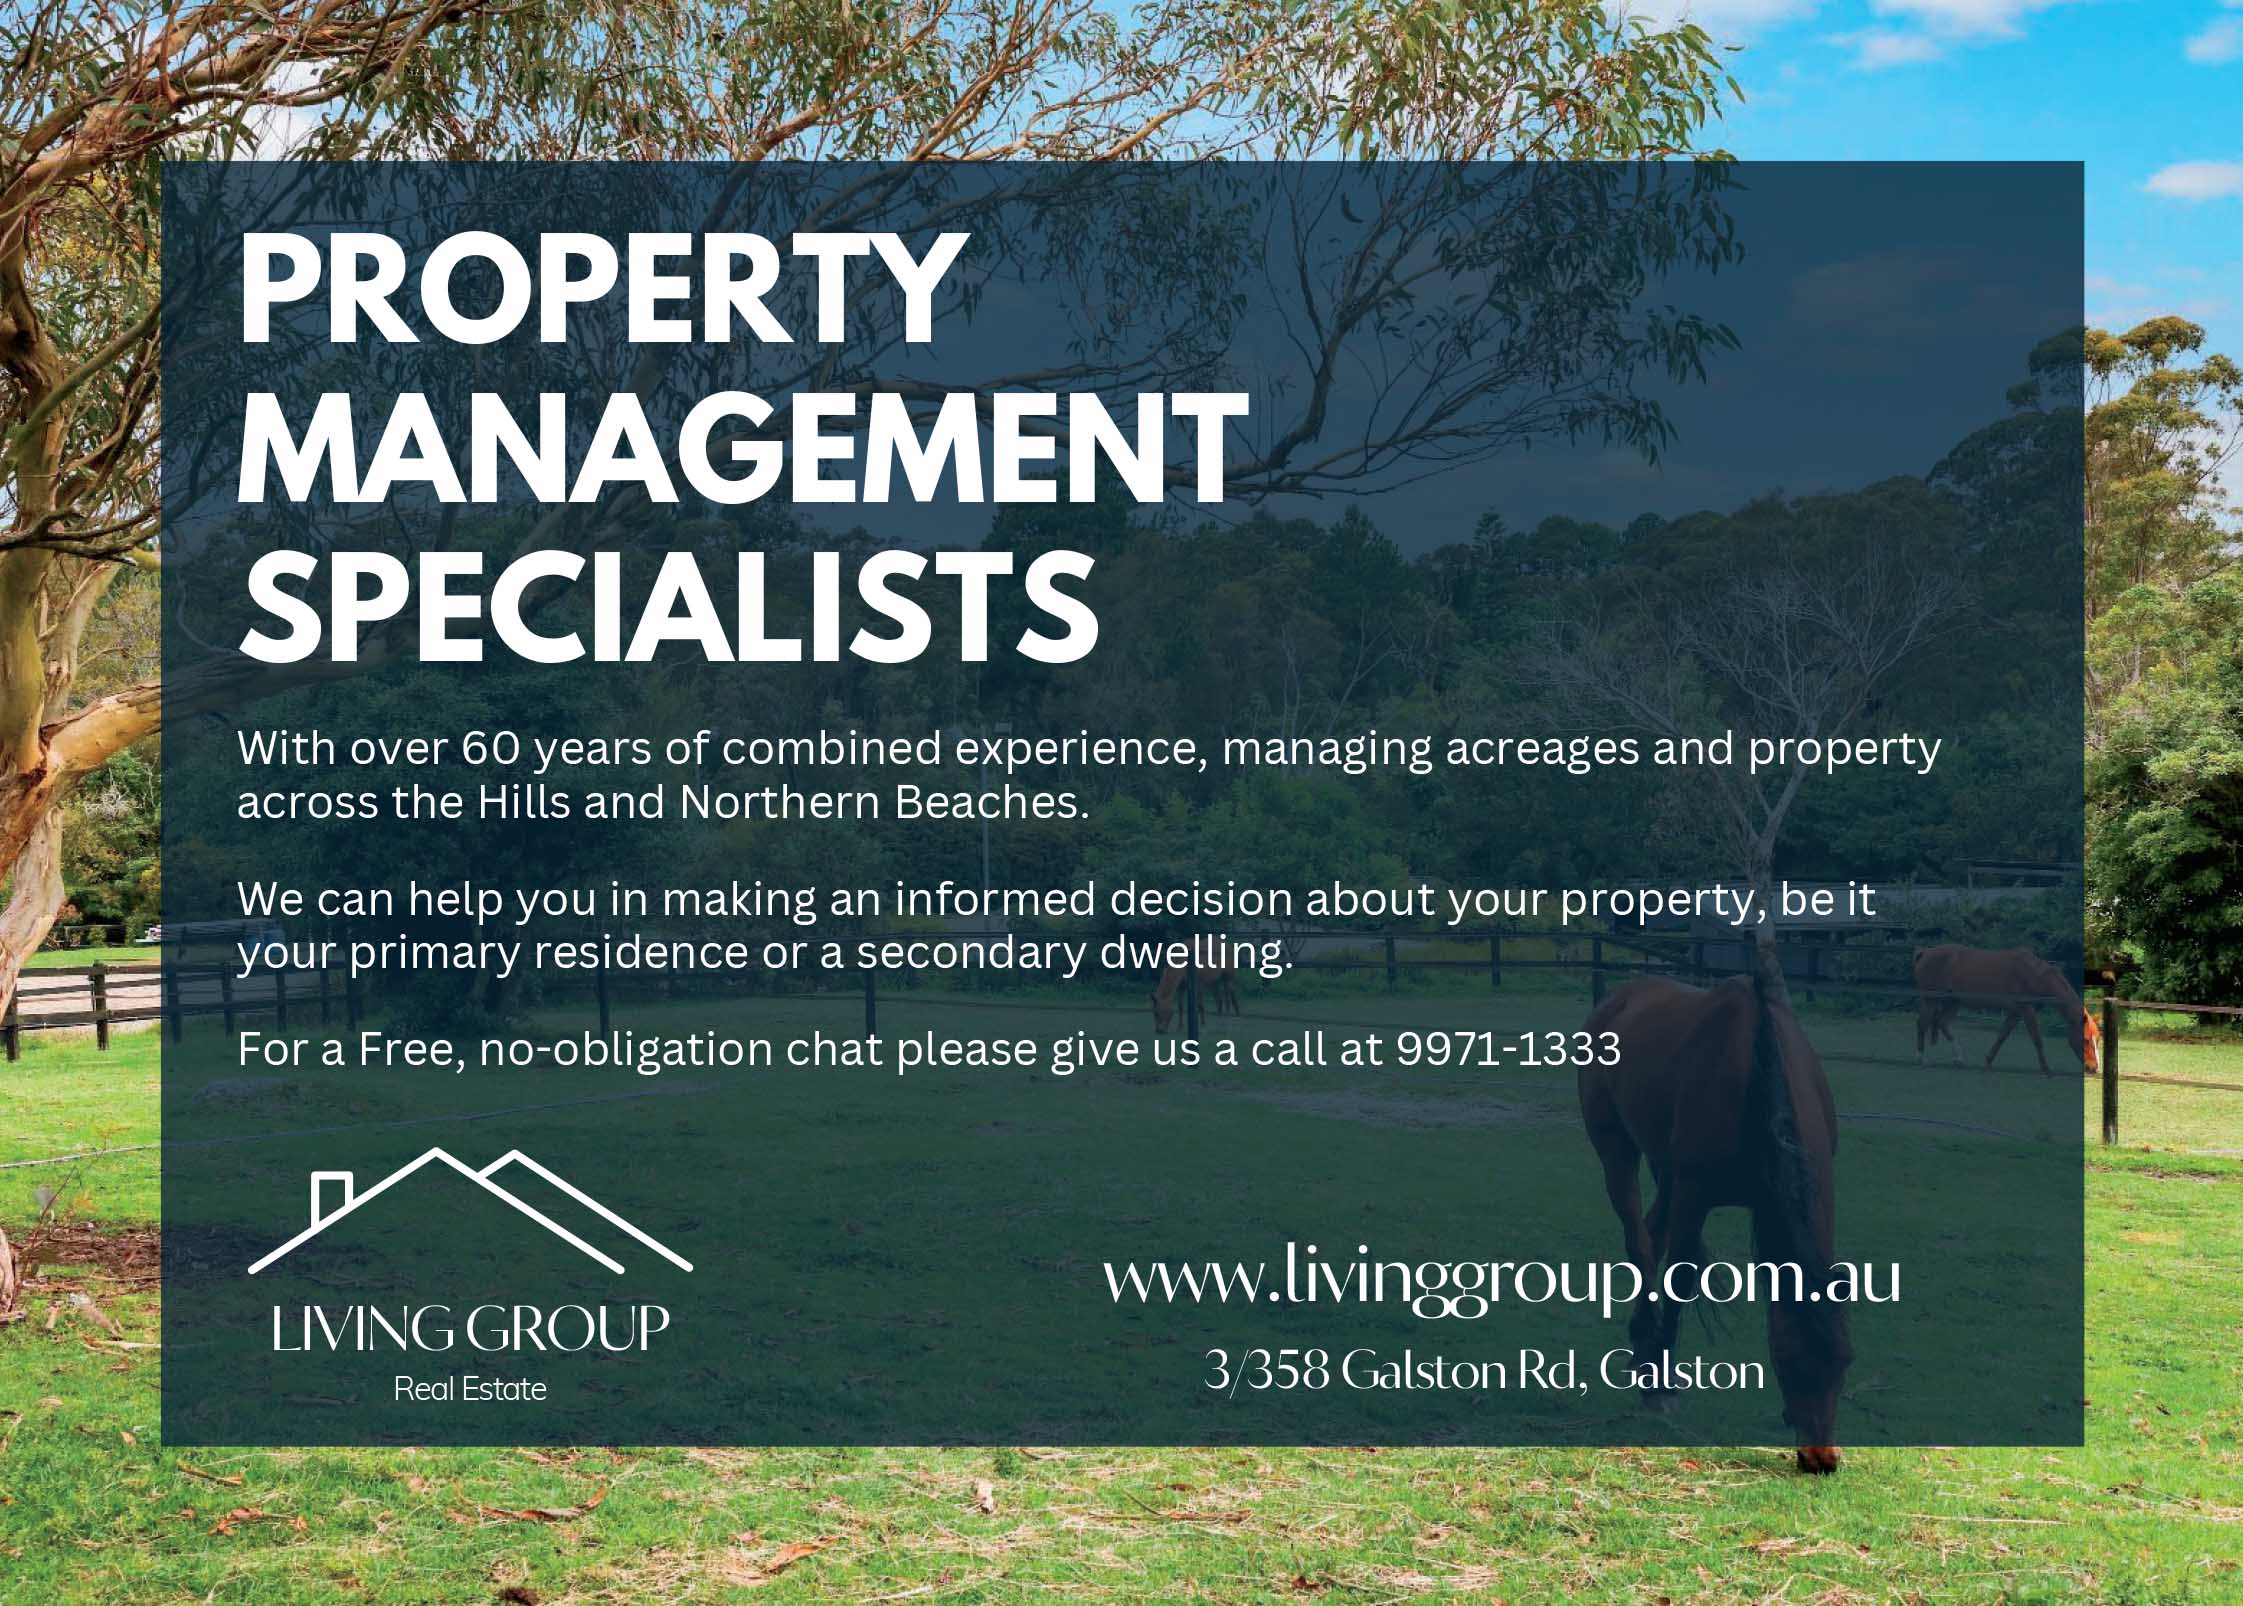 We Are Moving In - Your Trusted Property Management Experts